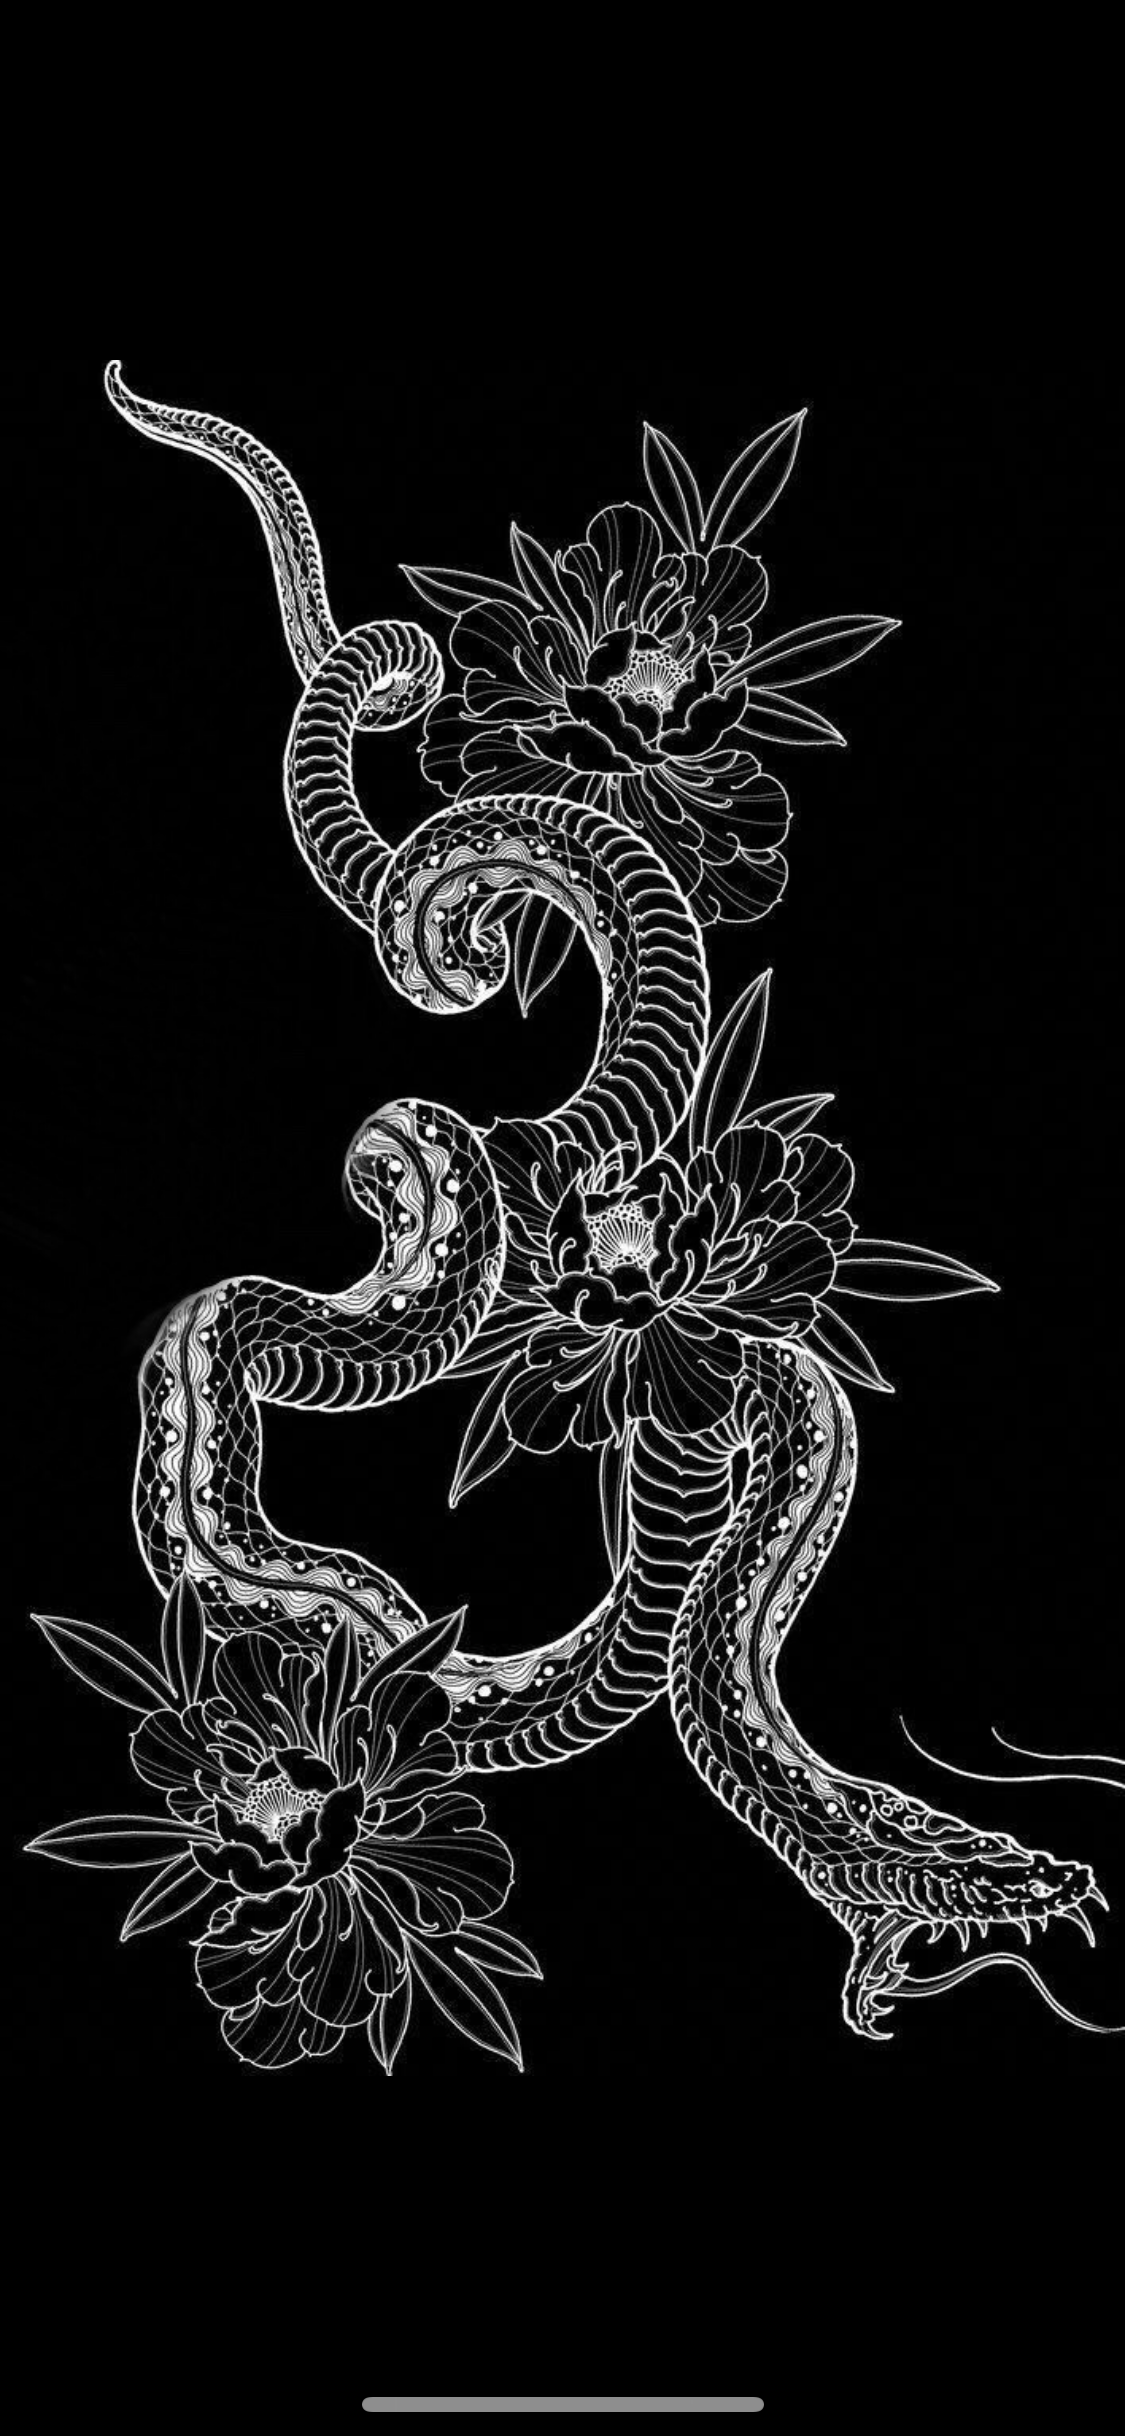 7800 Snake Tattoo Stock Photos Pictures  RoyaltyFree Images  iStock  Snake  tattoo art